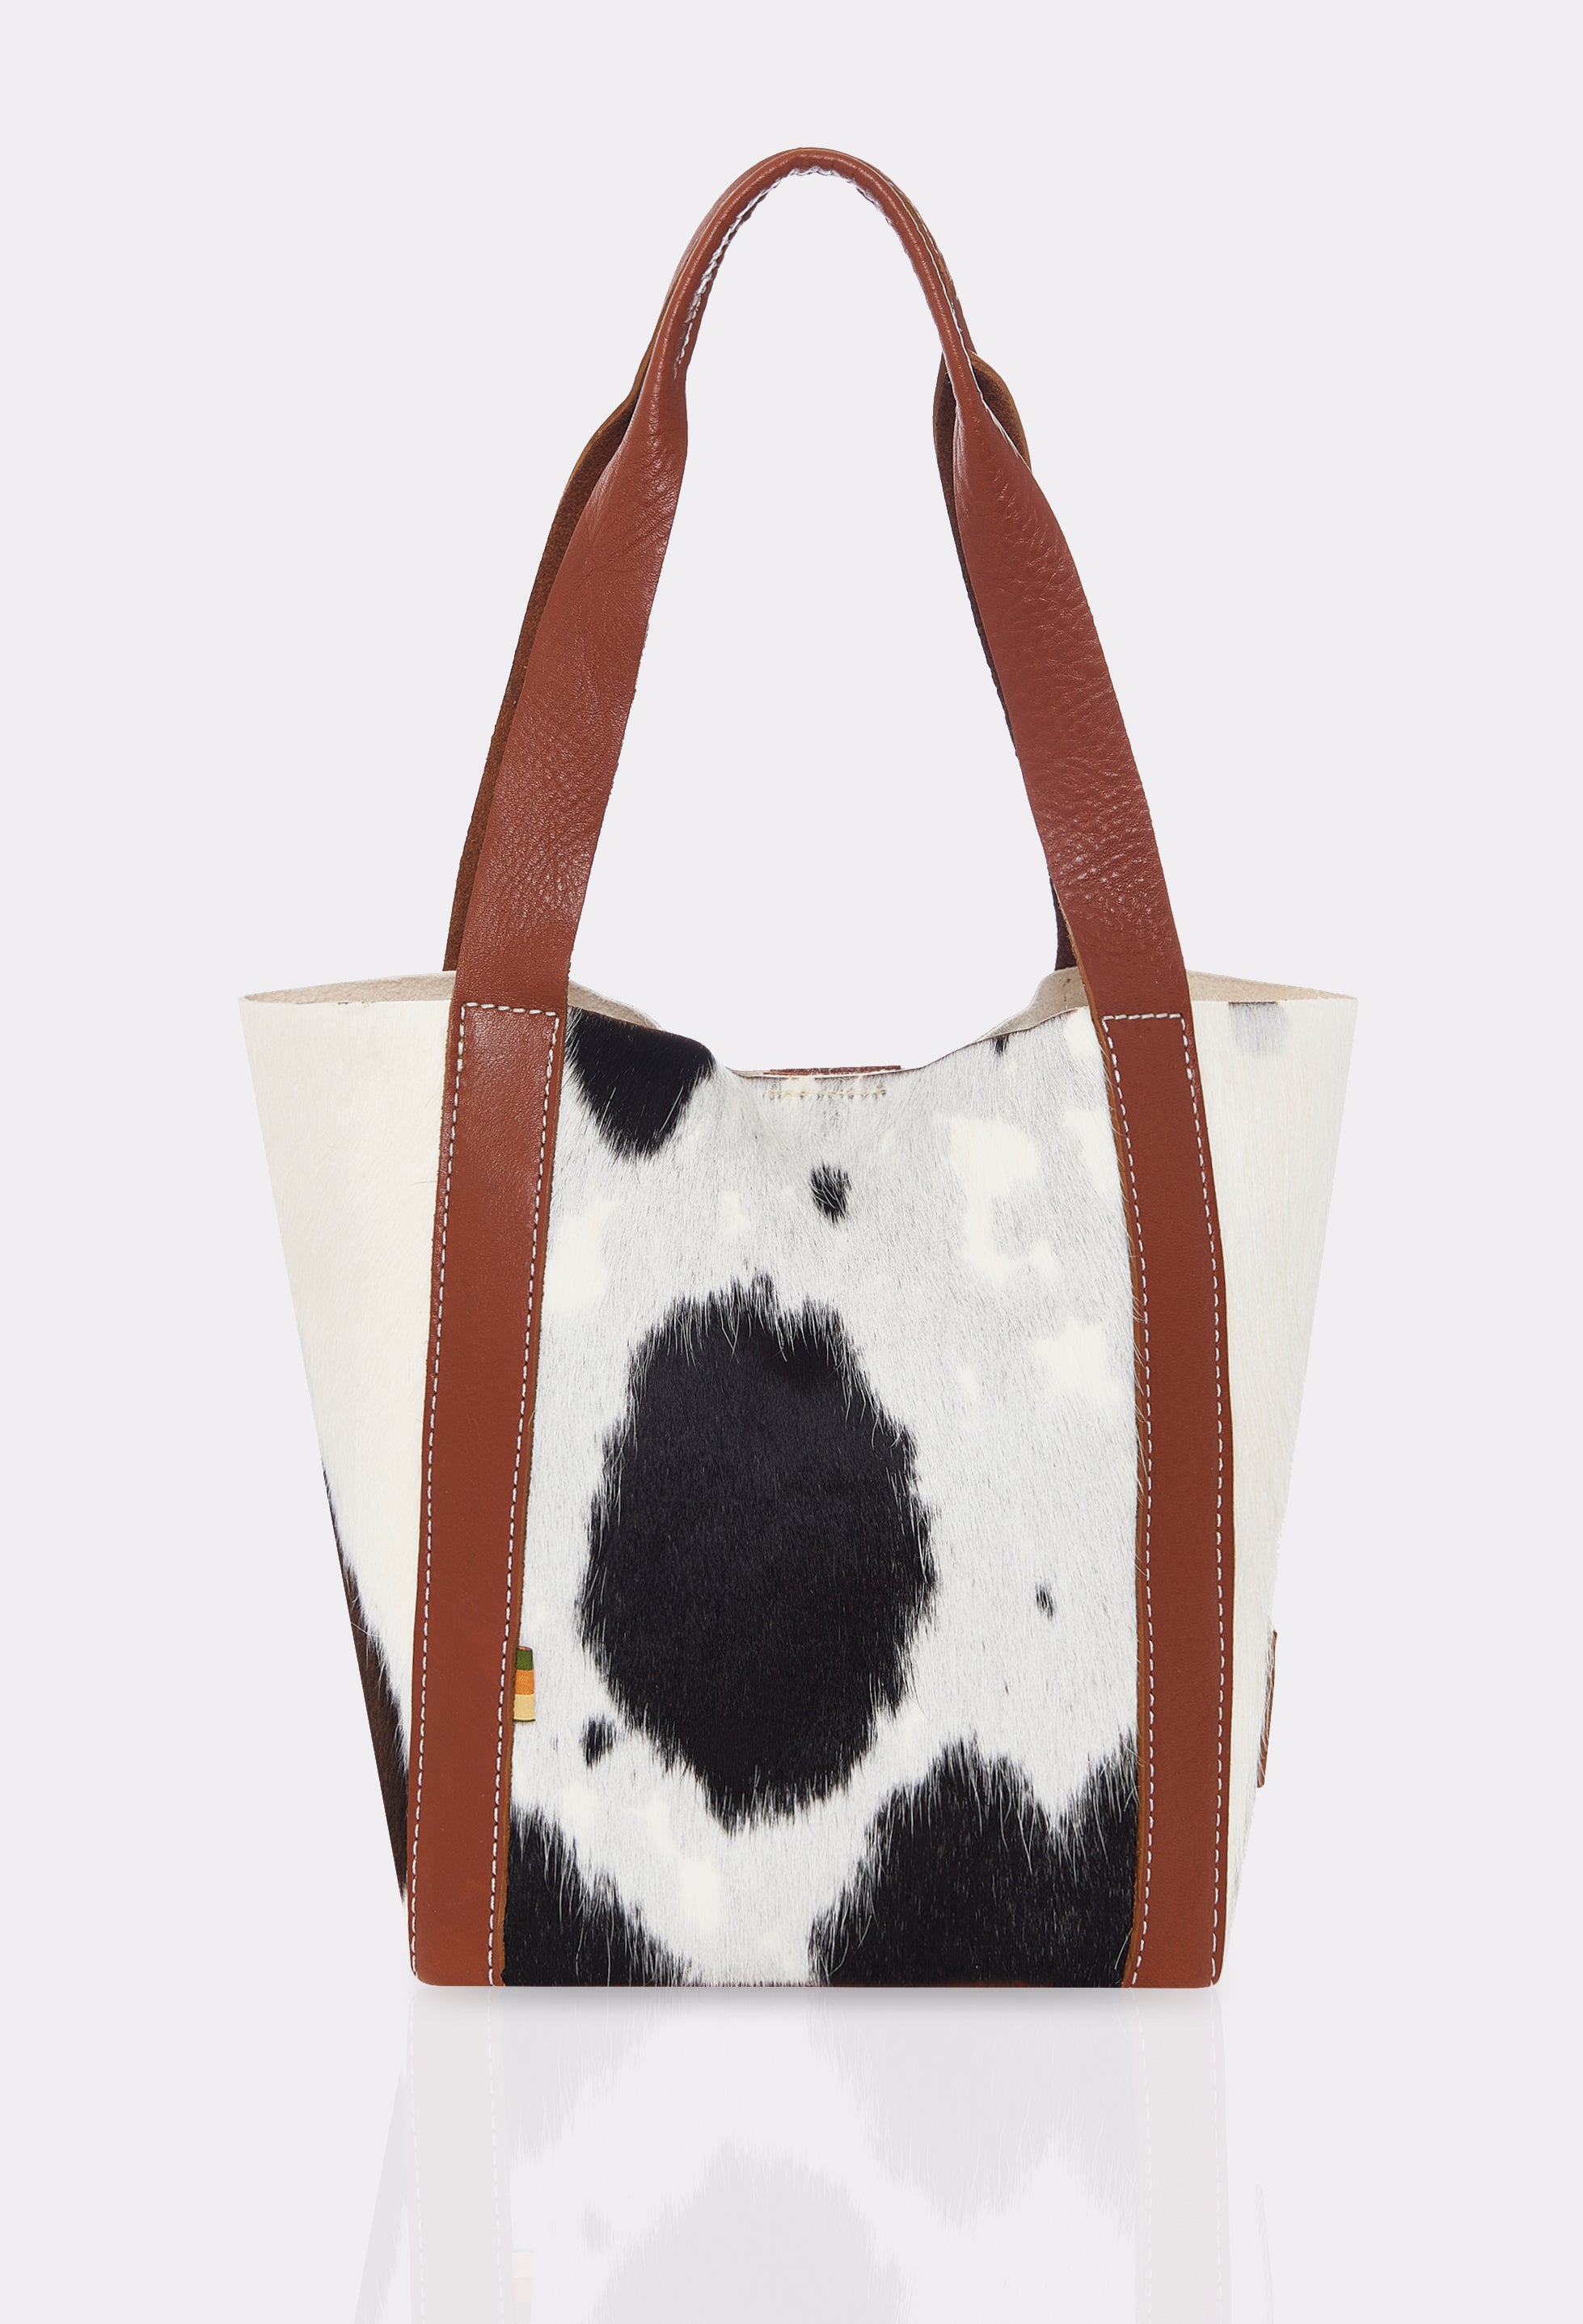 Rear of a Tan Cowhide Leather Mini Bucket Bag Ushuaia with contrast stitching highlights.